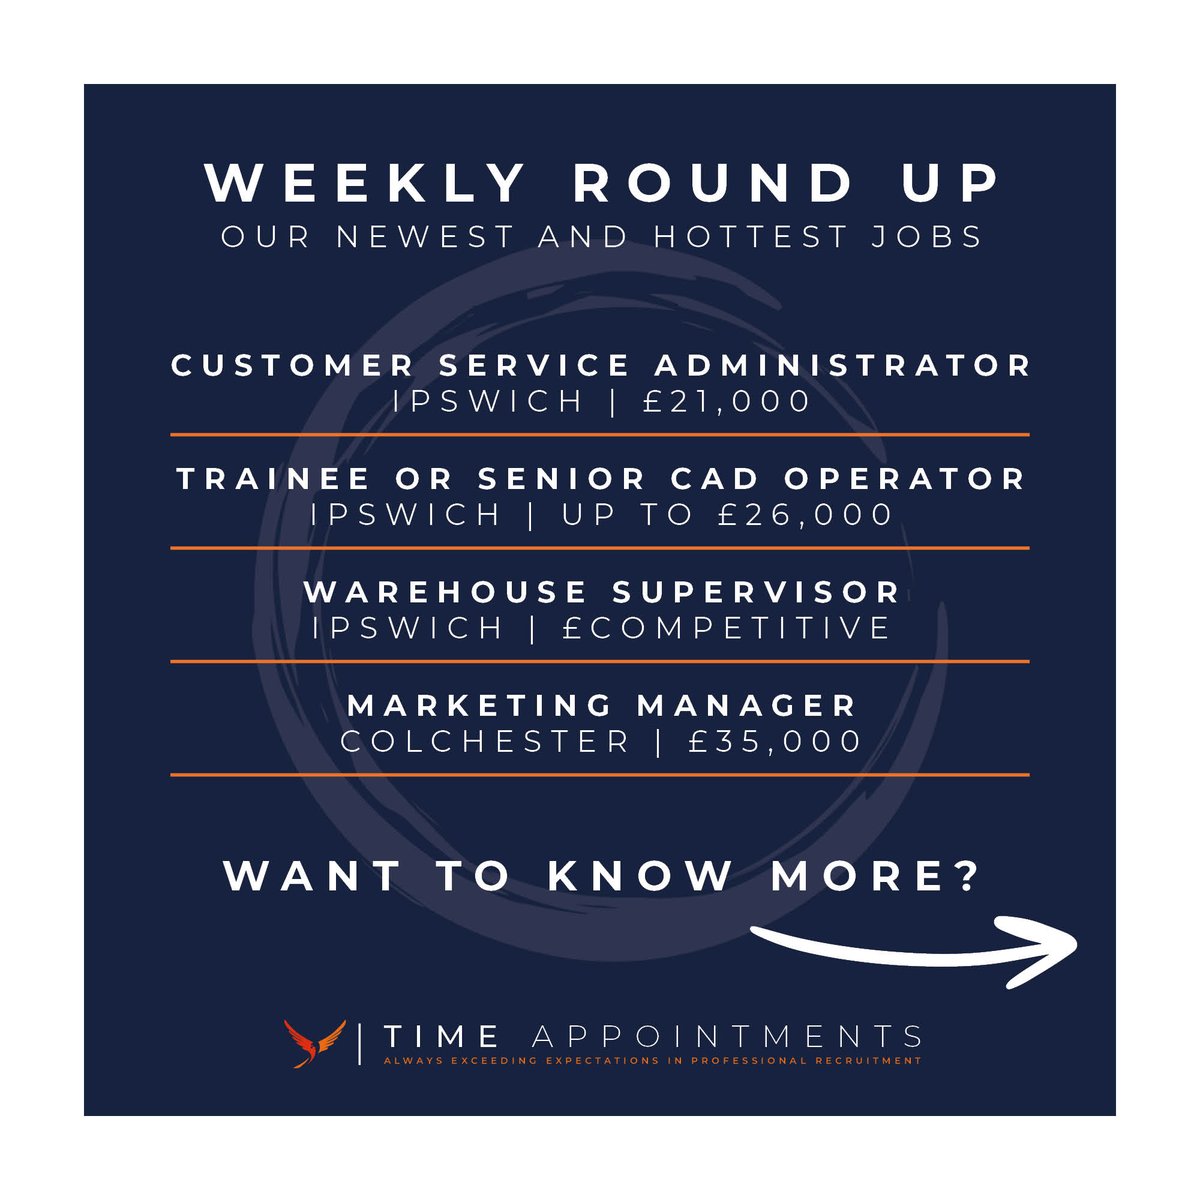 It's time for our Weekly Round Up of the newest and hottest jobs! 🔥

To learn more, visit our website or get in touch with our team today!

📞 01473 252 666
🌐 timeappointments.co.uk/jobs/

#recruitment #recruiting #opportunities #jobs #careers #ipswichjobs #Ipswich #Colchester